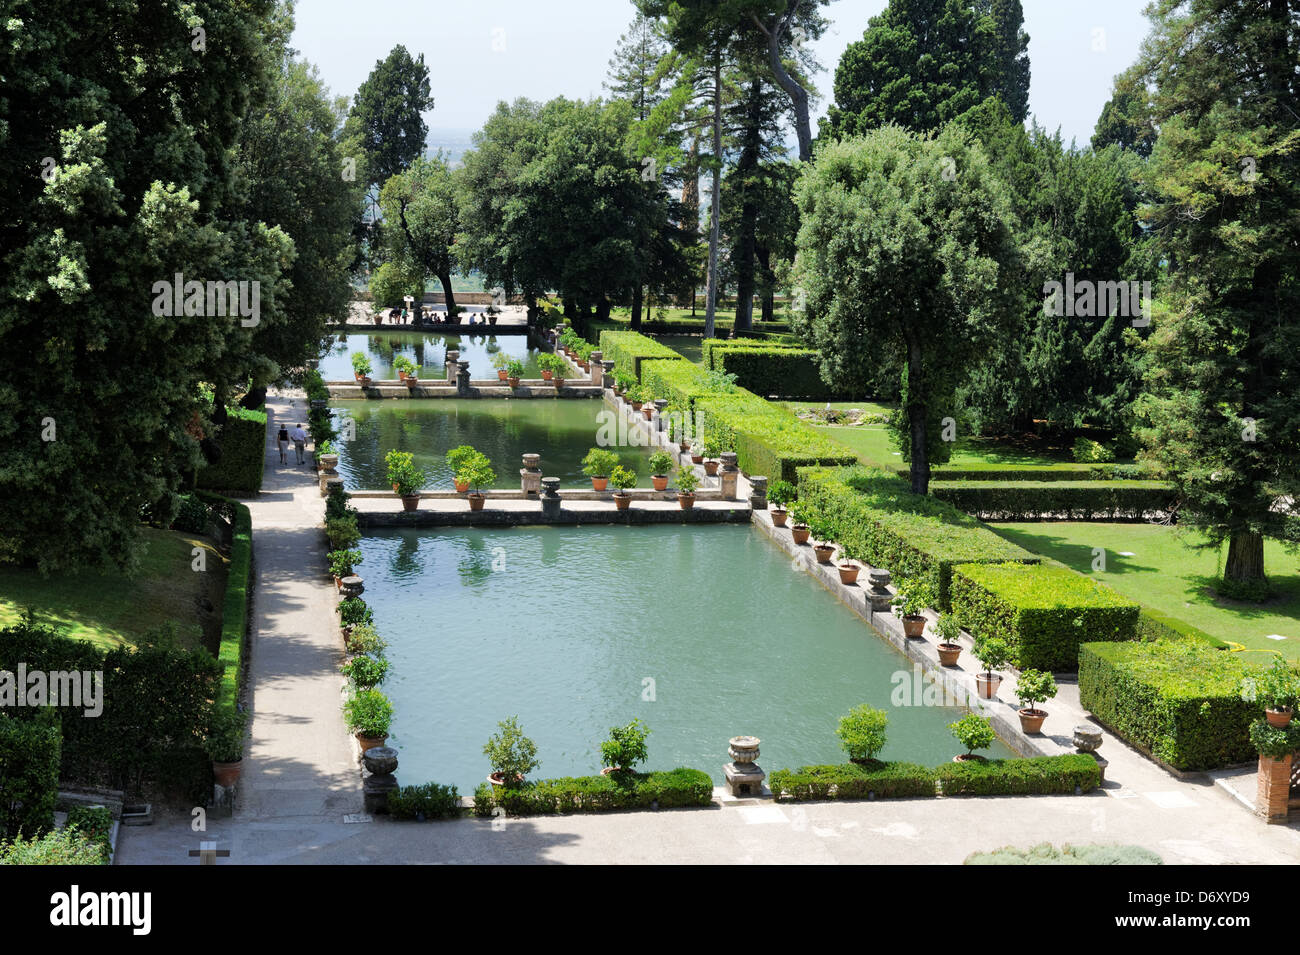 Villa d’Este. Tivoli. Italy. View of the magnificent landscaped and lush level gardens and fishponds at the Villa d Este in Tivo Stock Photo